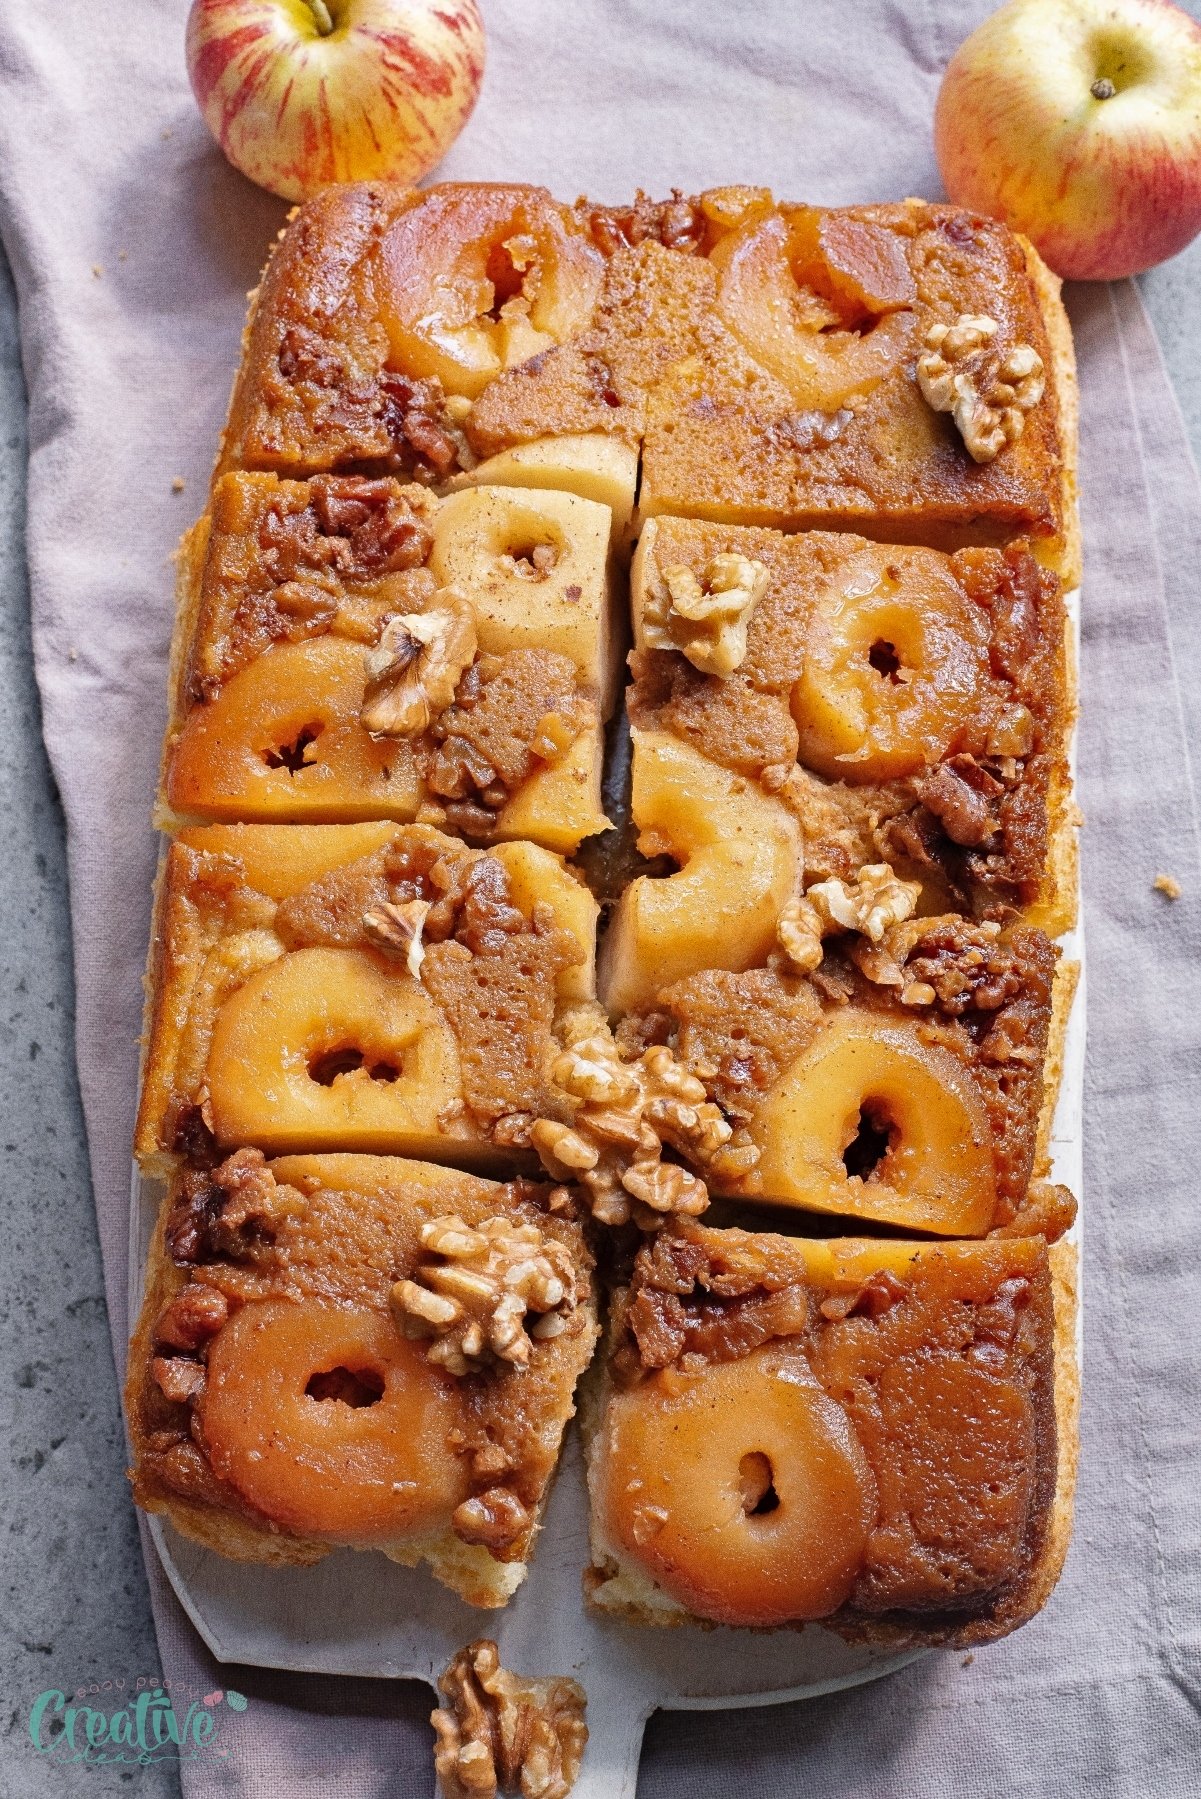 Apple cake with whole apples